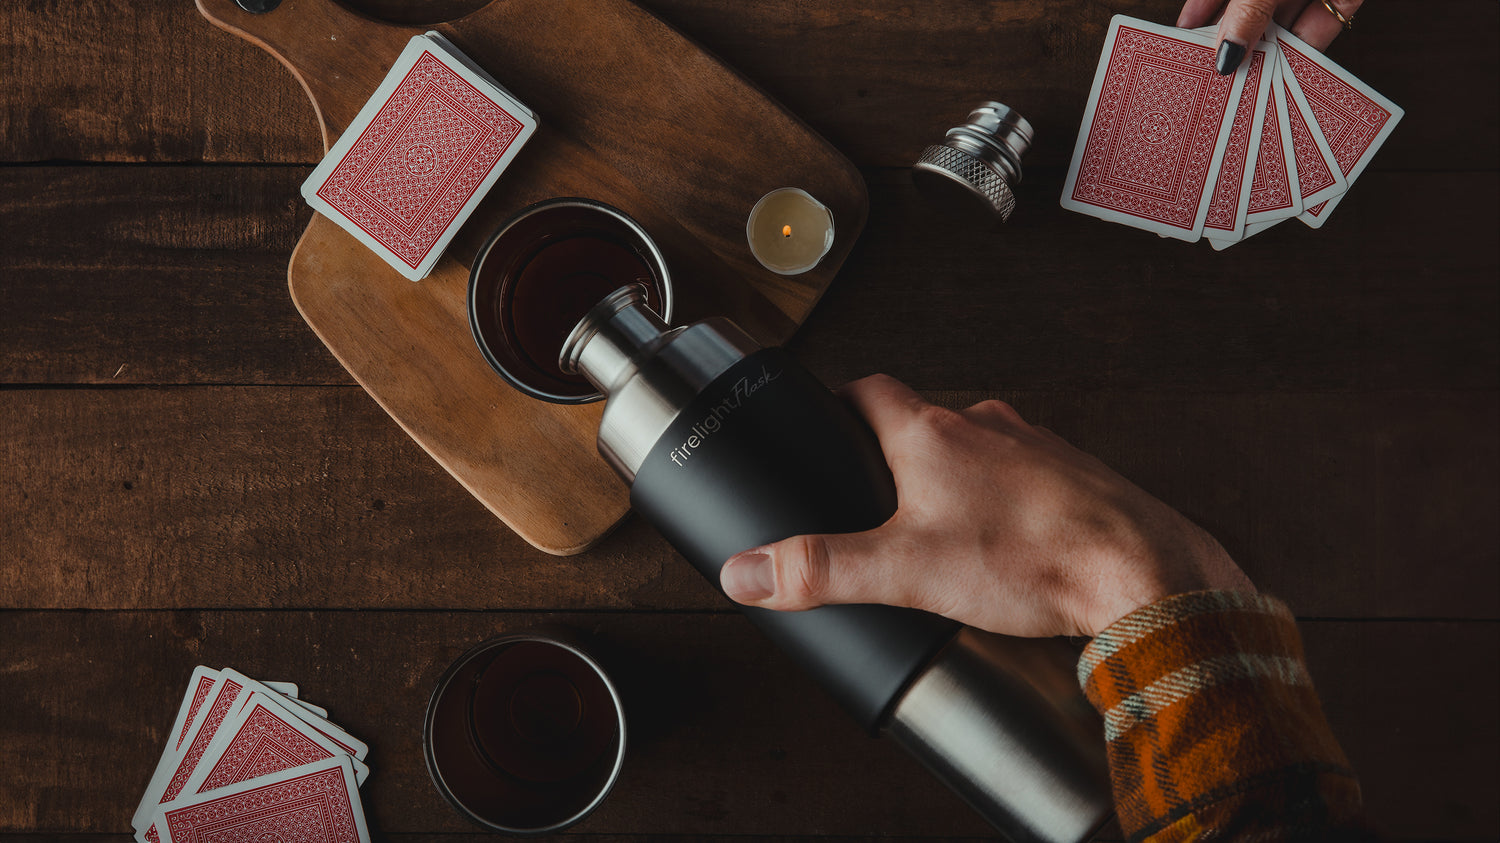 The High Camp Firelight 750 Flask: Designed To Hold A Full Bottle Of Whiskey